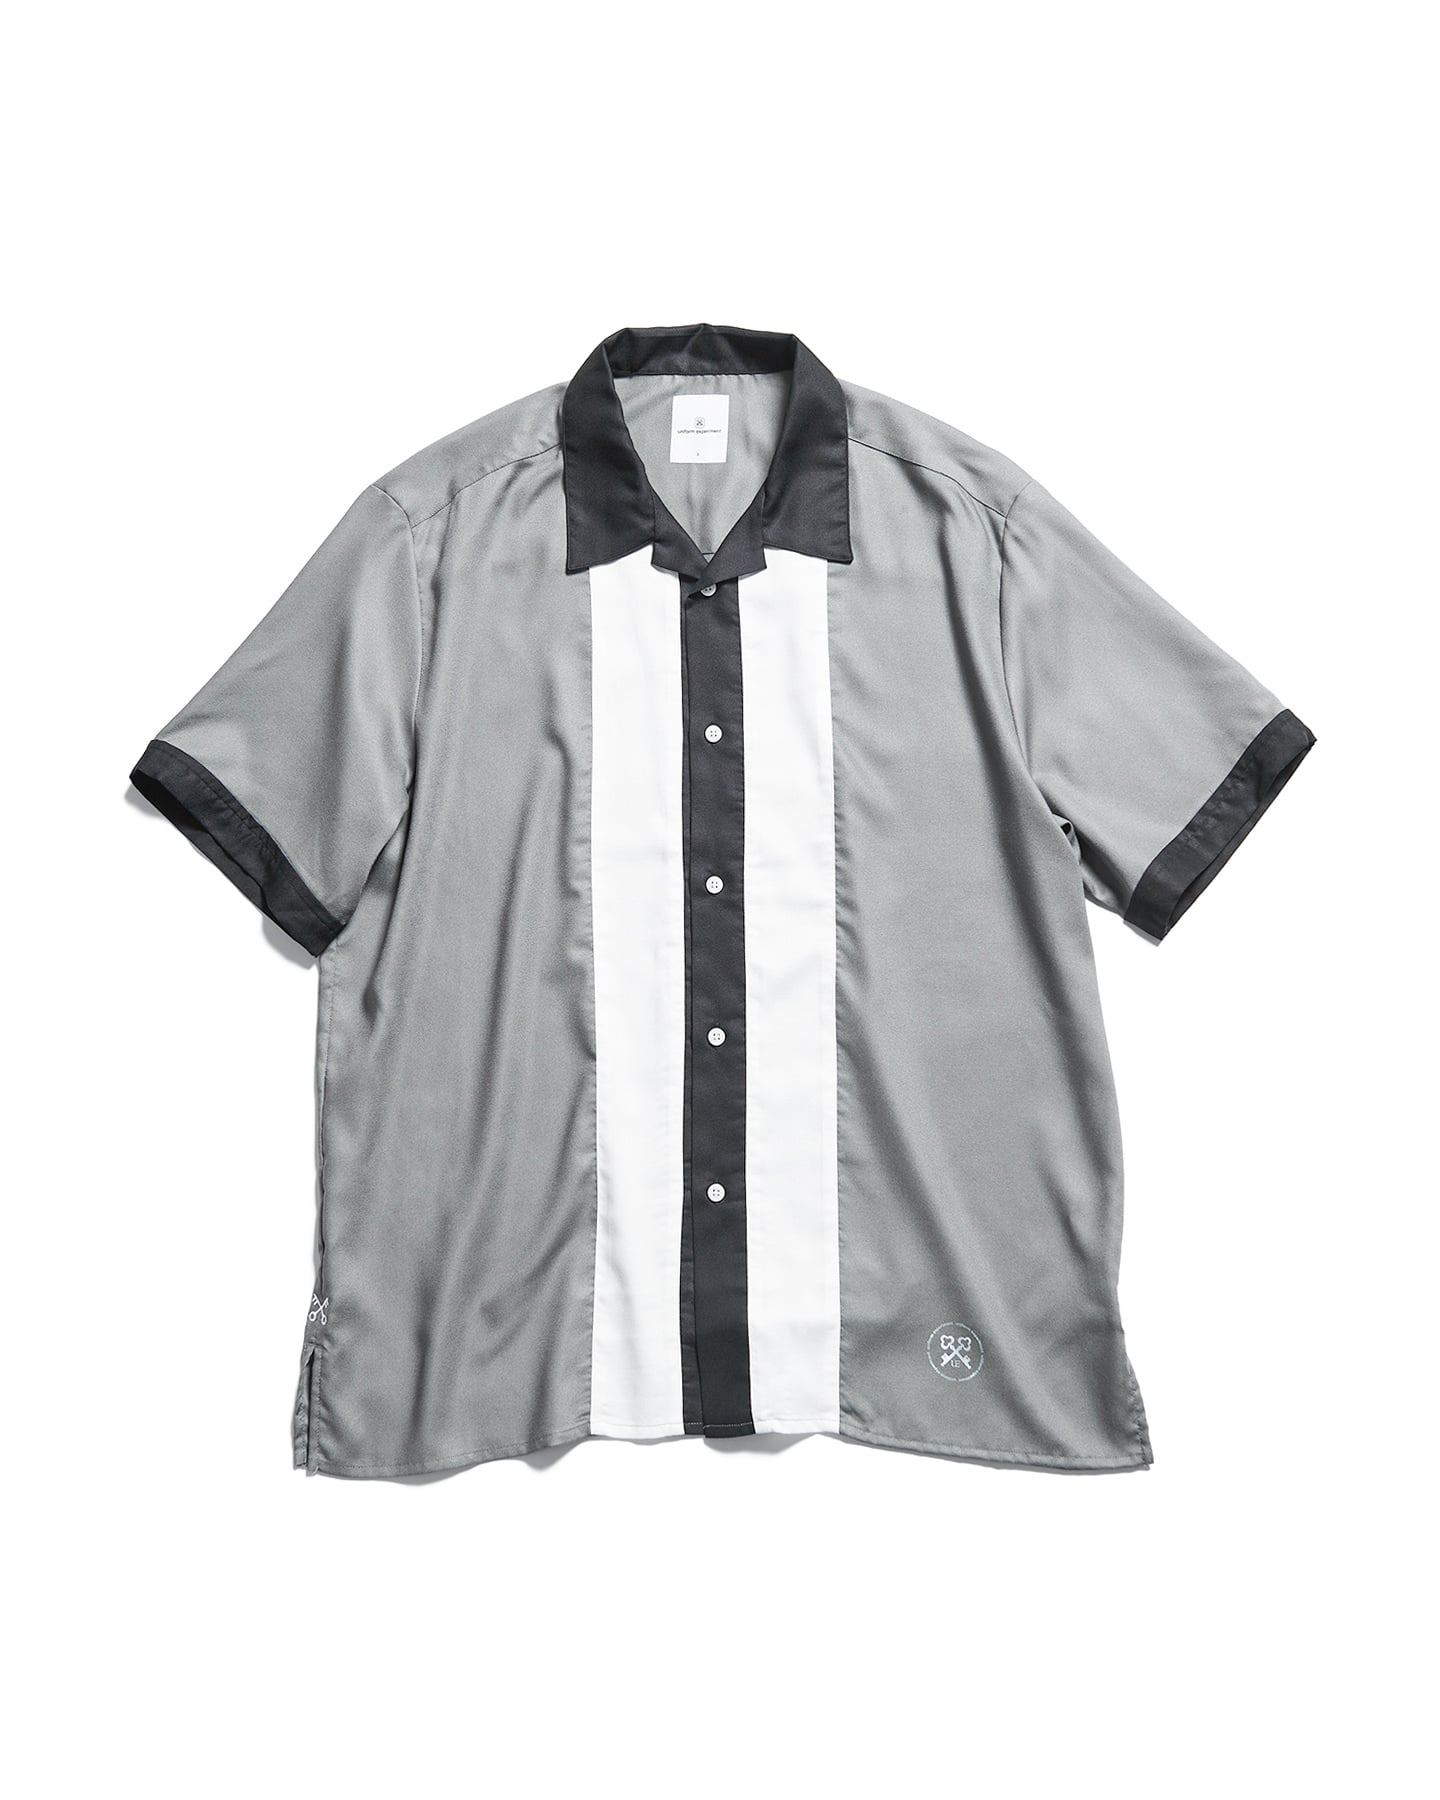 SOPH. | WASHABLE RAYON S/S OPEN COLLAR SHIRT(2 GRAY):